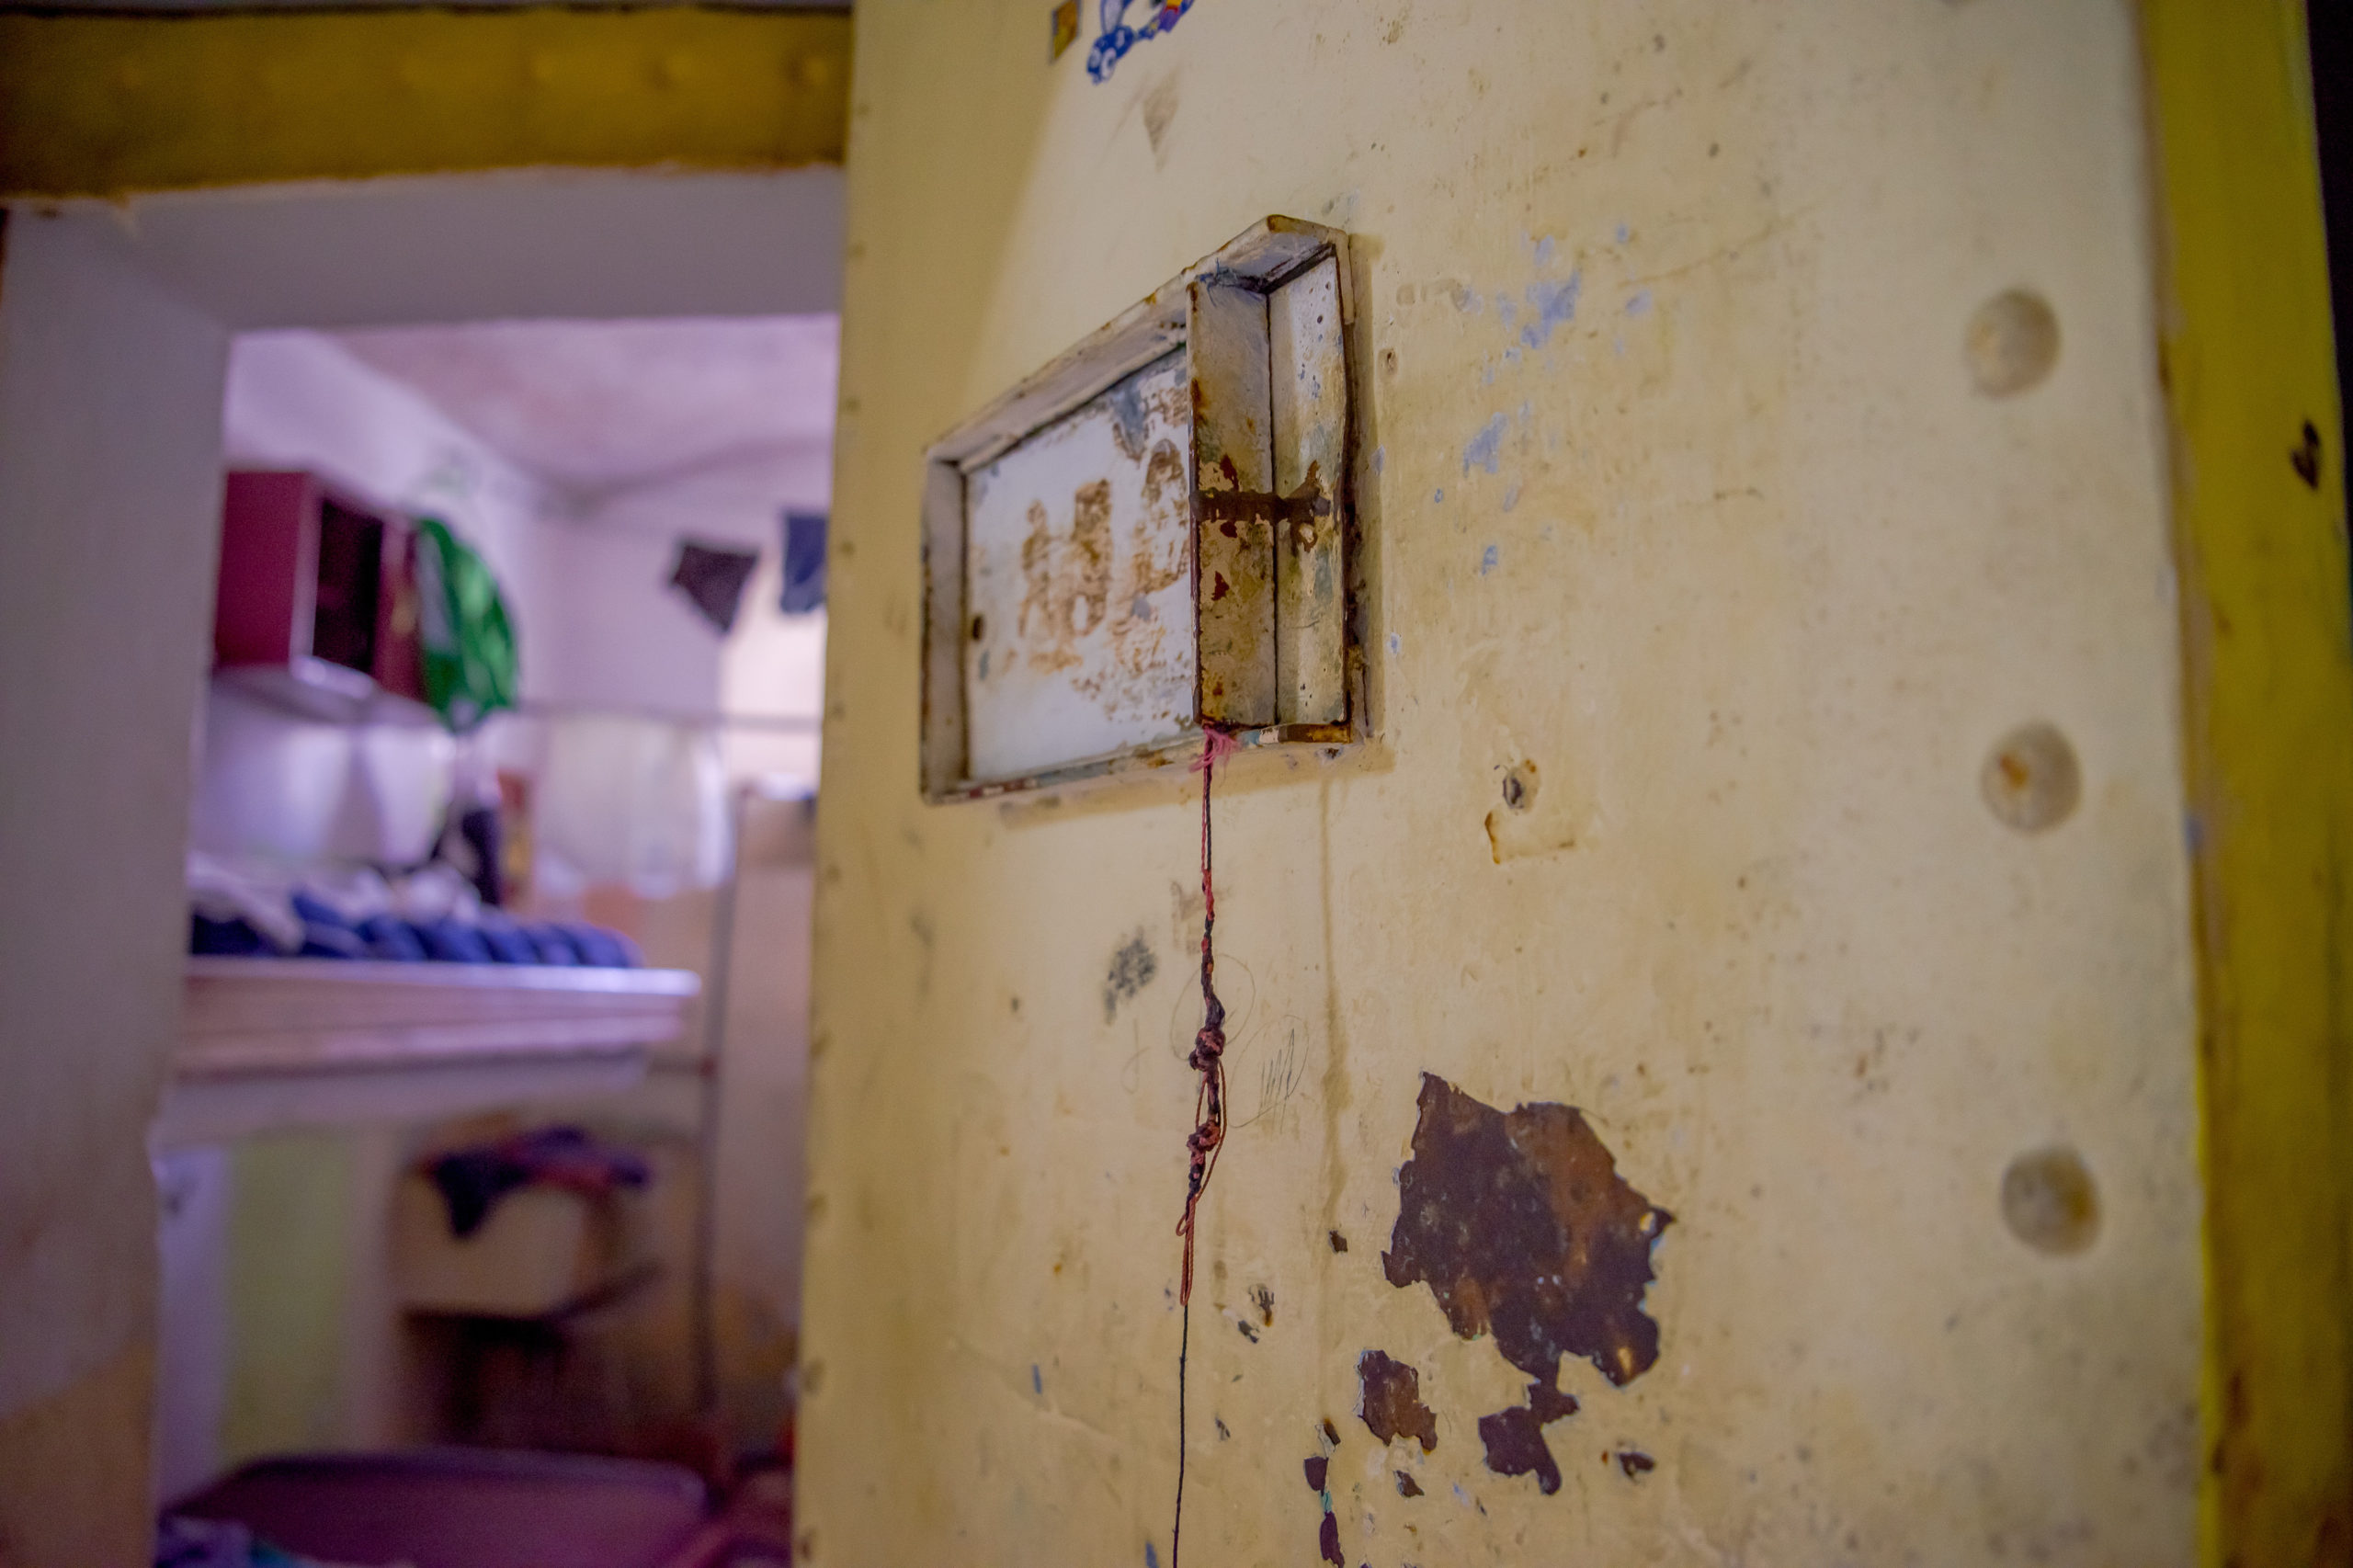 Image shows a grimy yellow wall in the foreground, and an out-of-focus look into a prison cell in the background. 